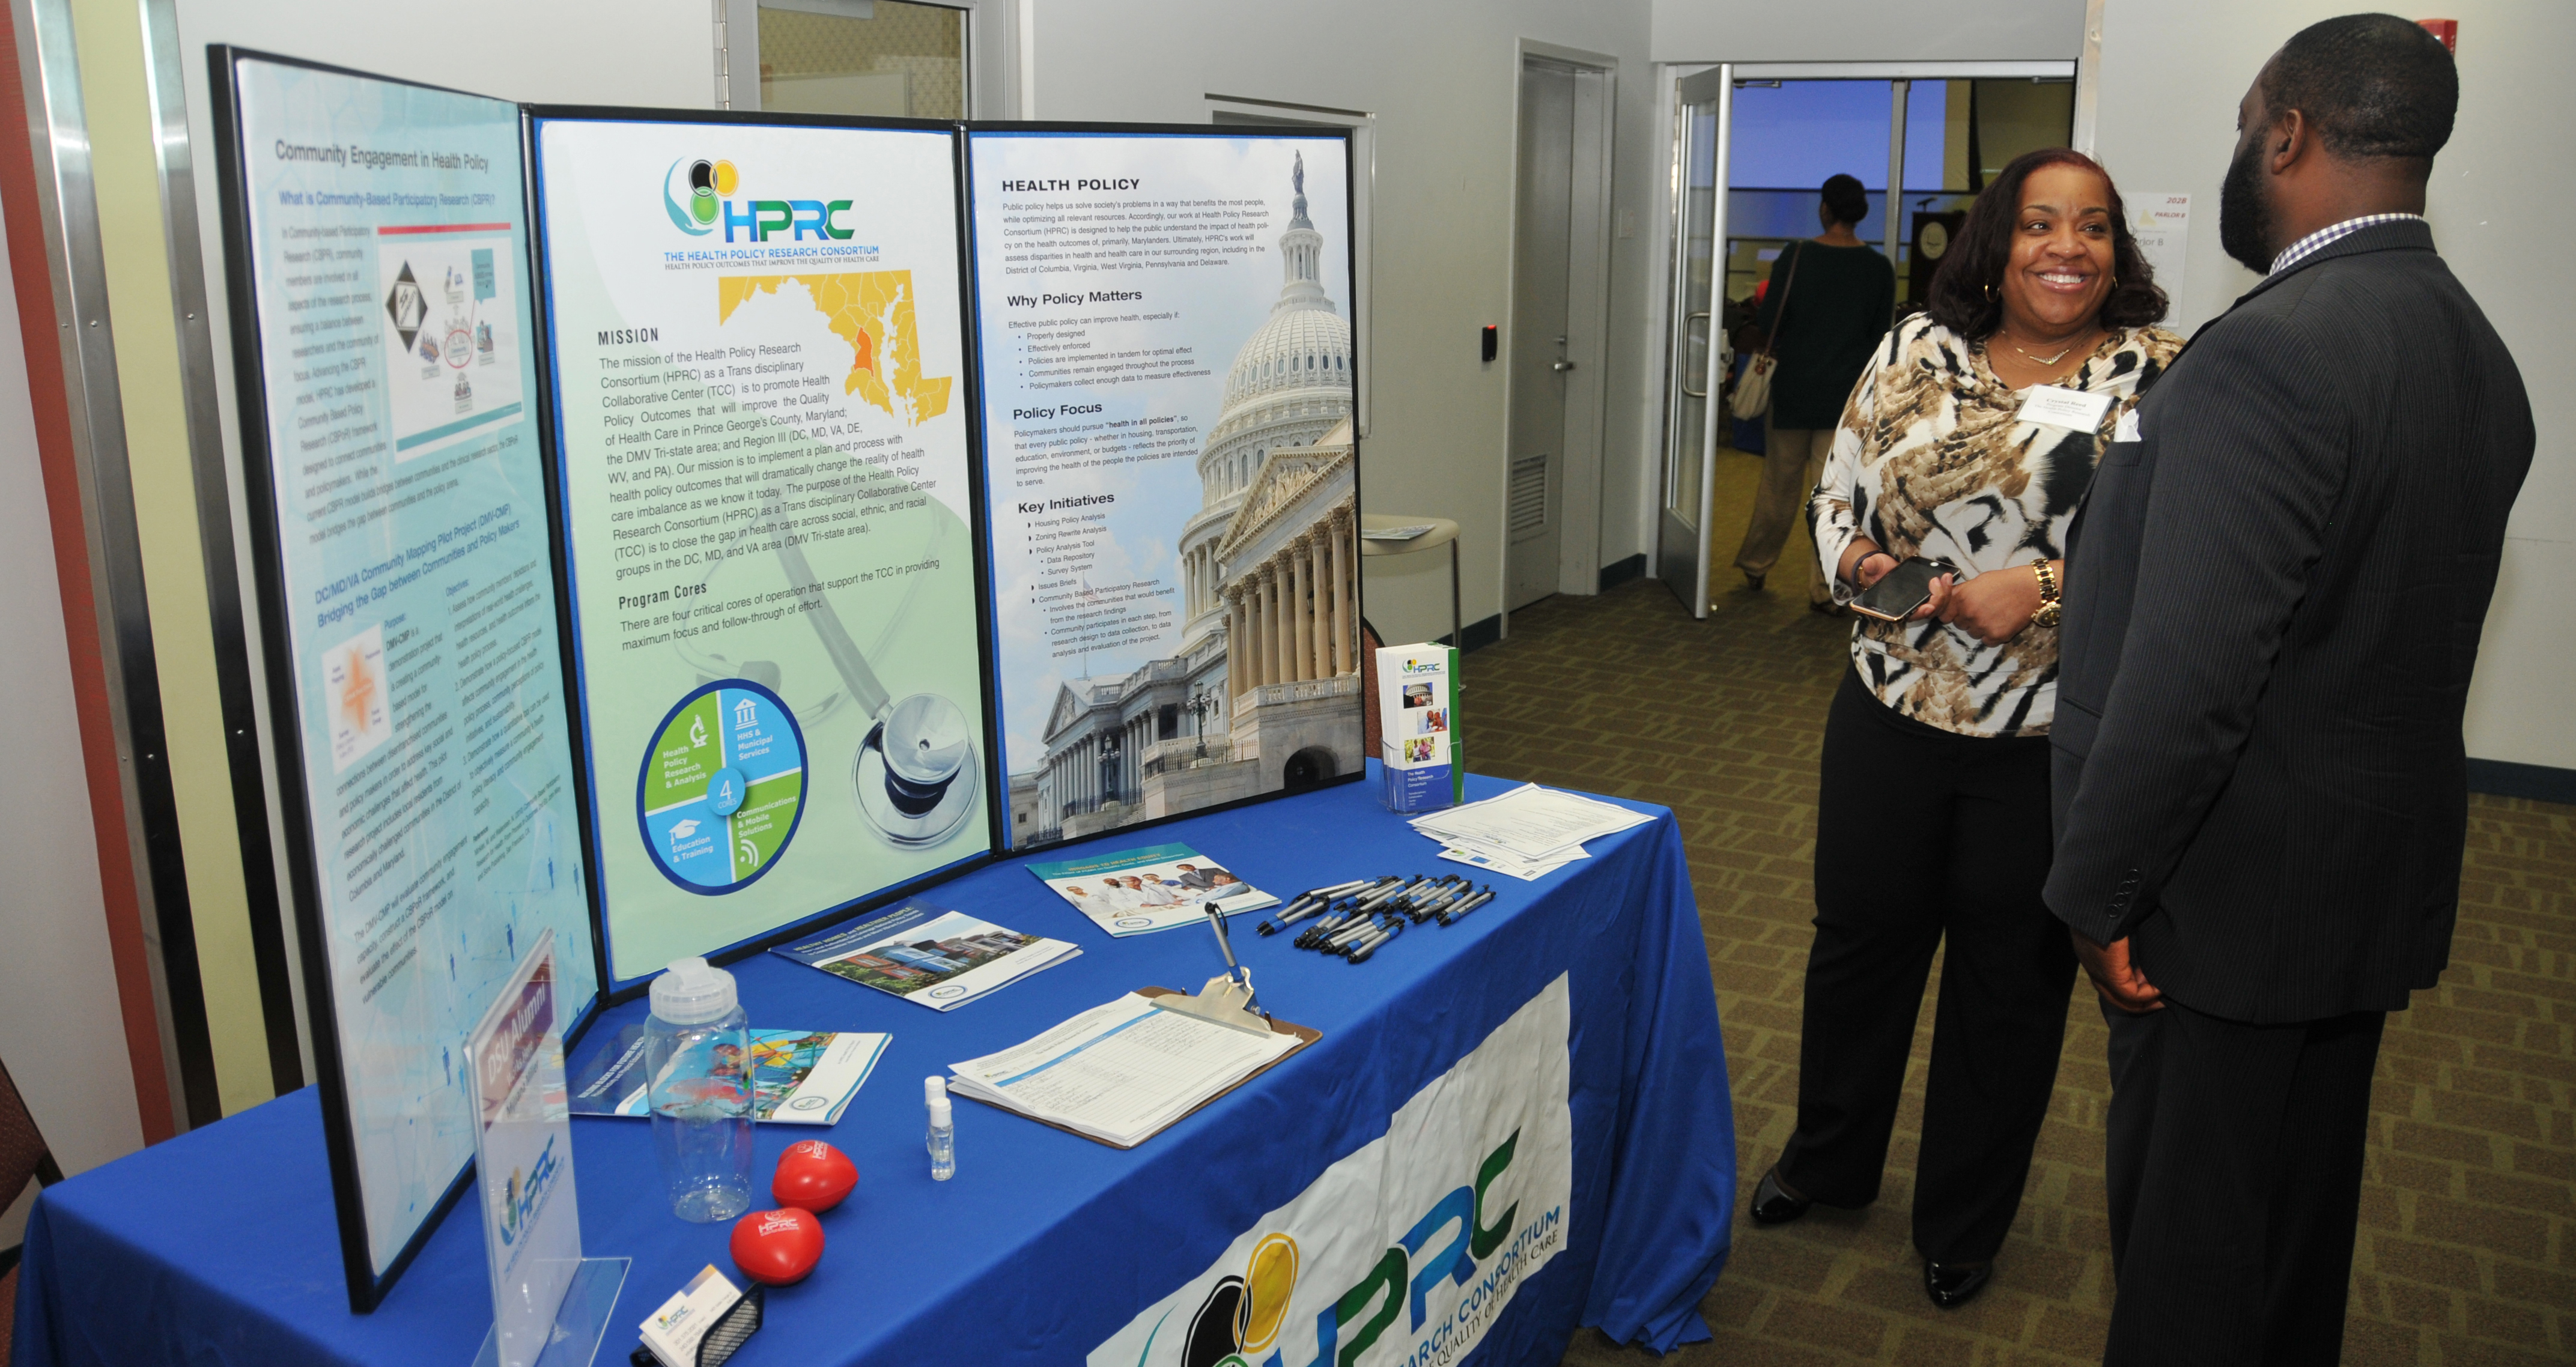 Two March 29 Health Events held in MLK Jr. Student Ctr.